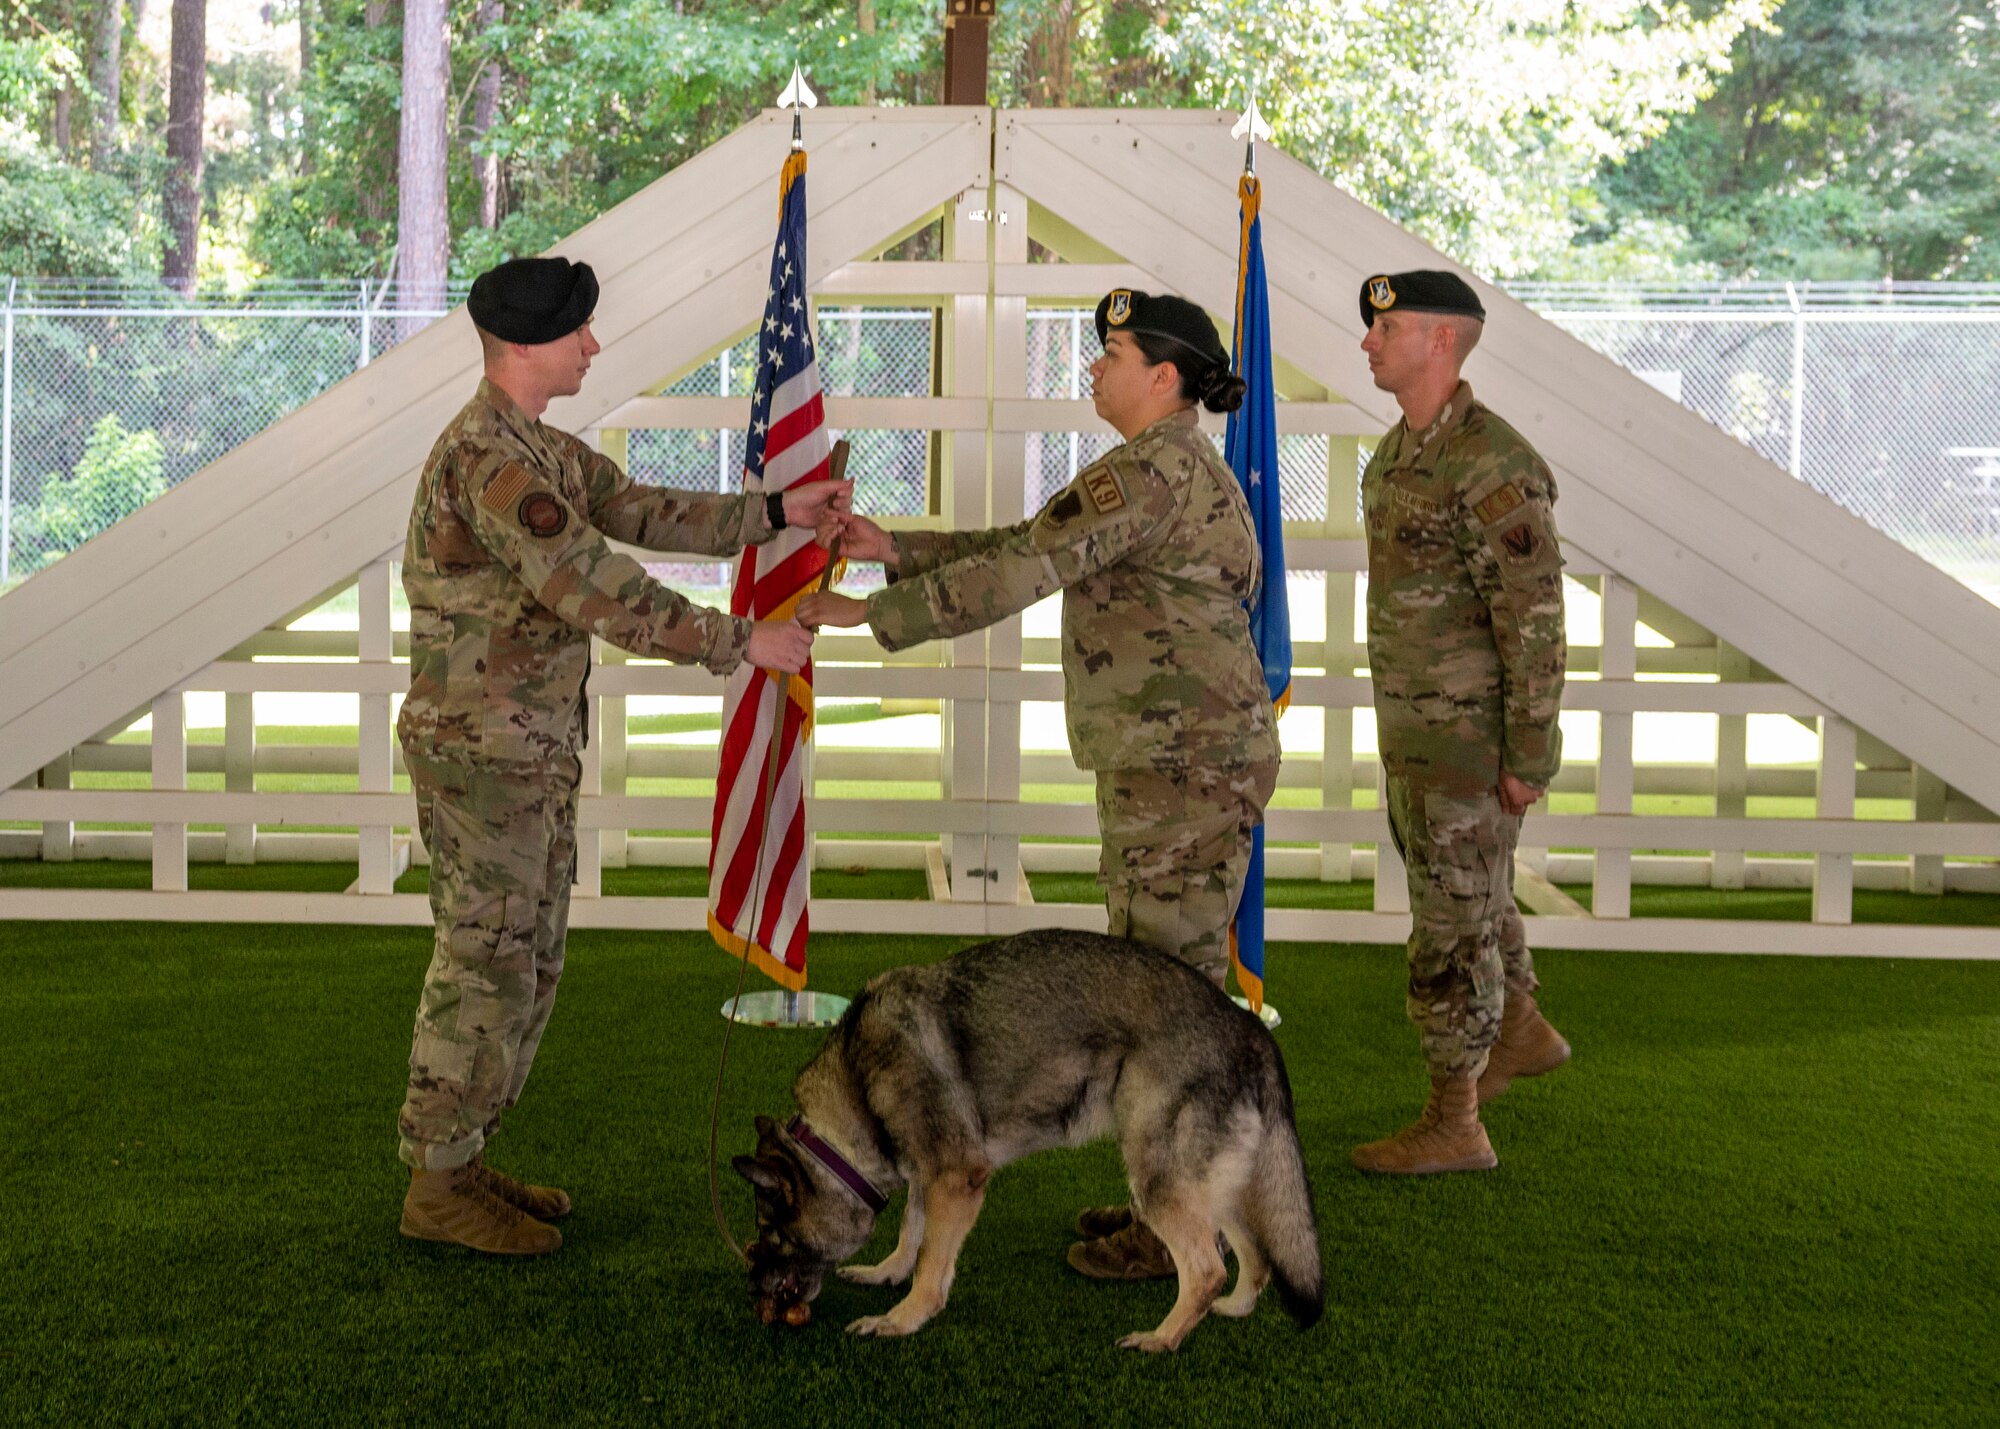 Capt. Samuel Doyel, left, 4th Security Forces Squadron operations officer, passes military working dog Gina’s leash to Staff Sgt. Maegan-Ann Baptista, middle, 4th Security Forces Squadron MWD hander, to symbolize ownership during Gina’s retirement ceremony at Seymour Johnson Air Force Base, North Carolina, Aug. 26, 2021.